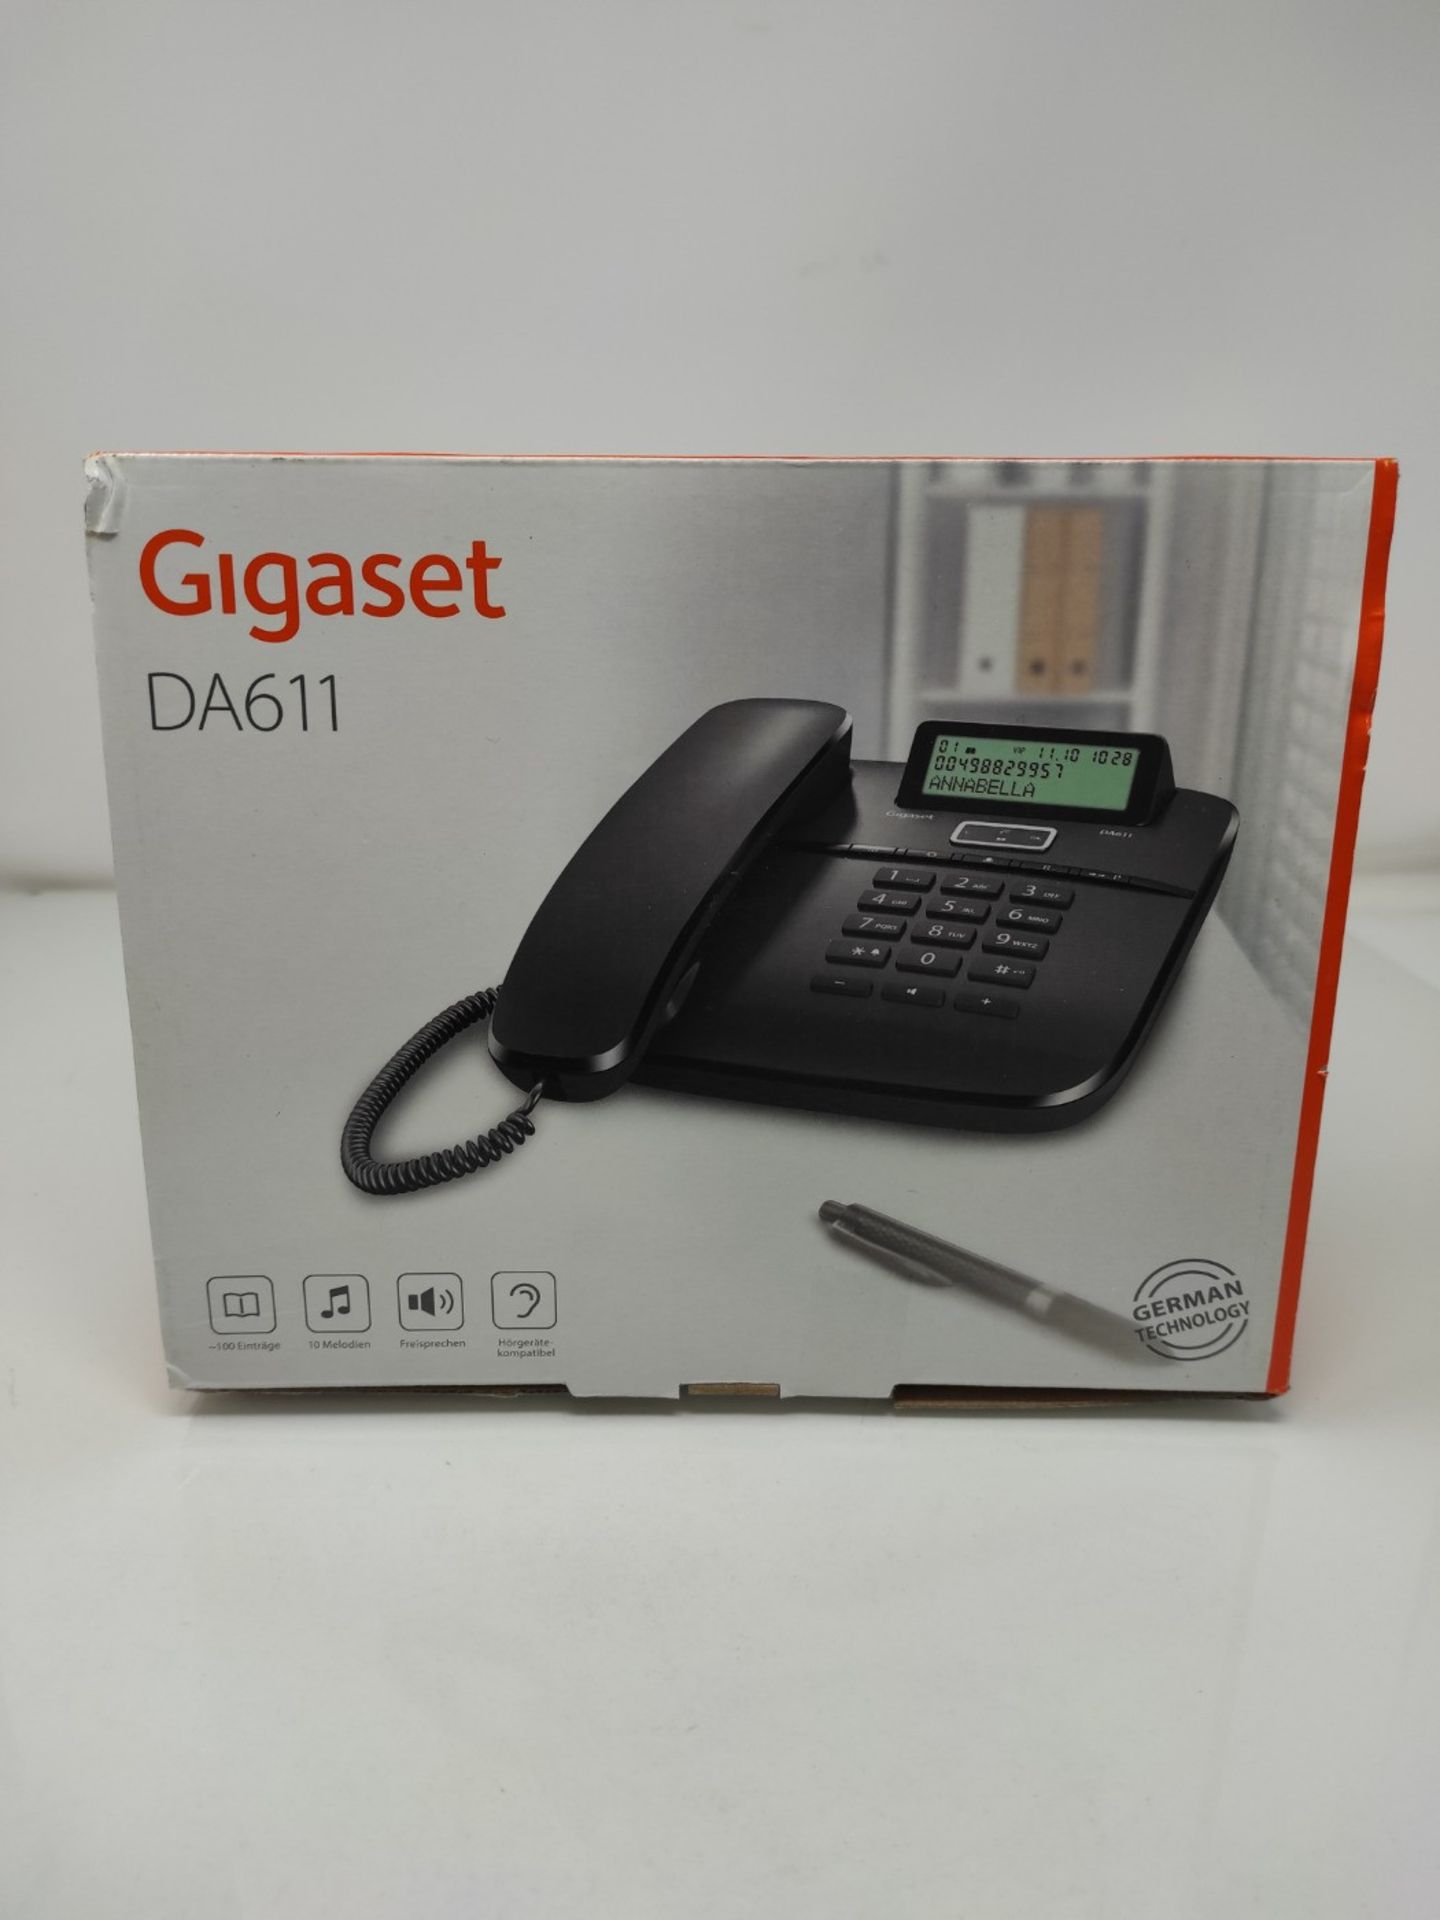 Gigaset DA611 - Corded telephone with hands-free function - Phone book with VIP markin - Image 2 of 3